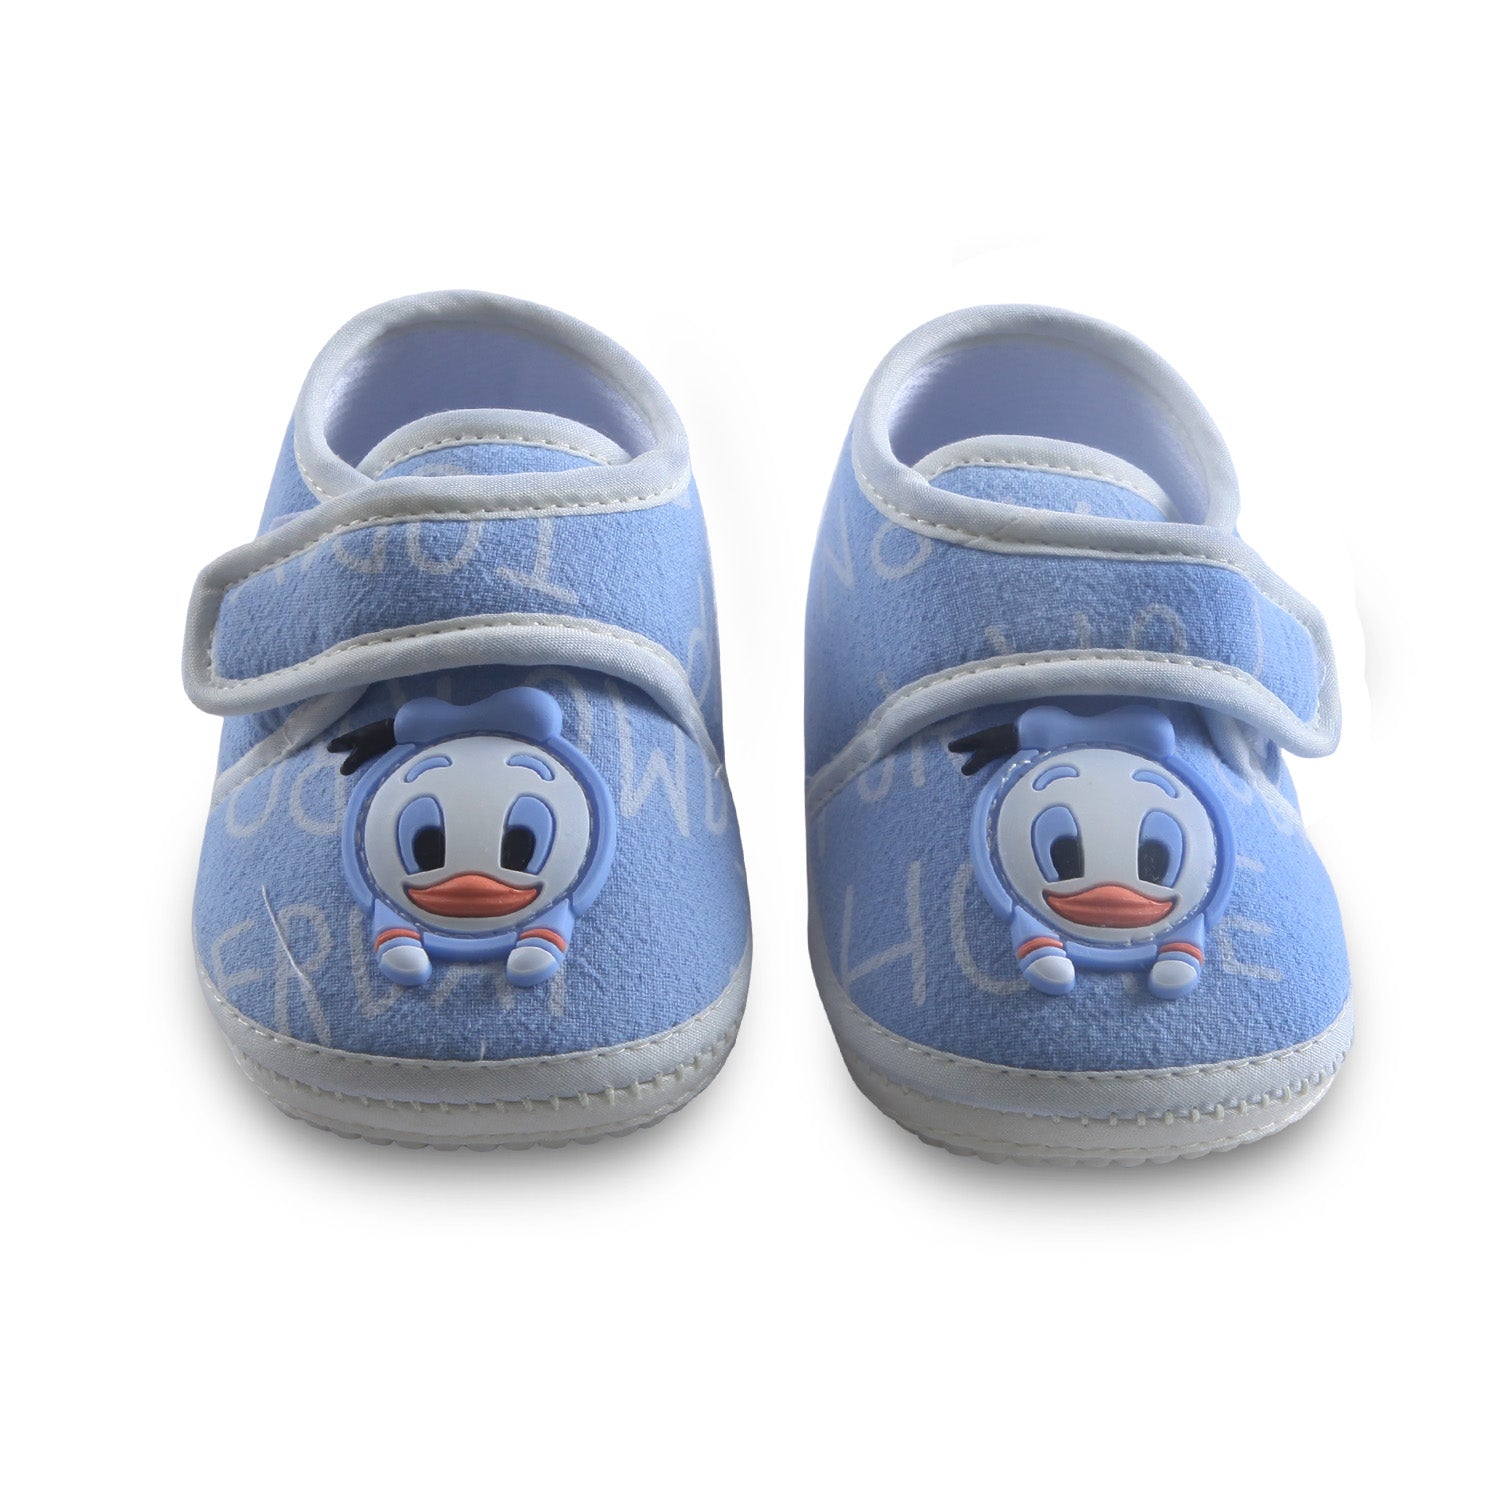 Non-slip Booties with Strap Kids Shoes Duck - Blue